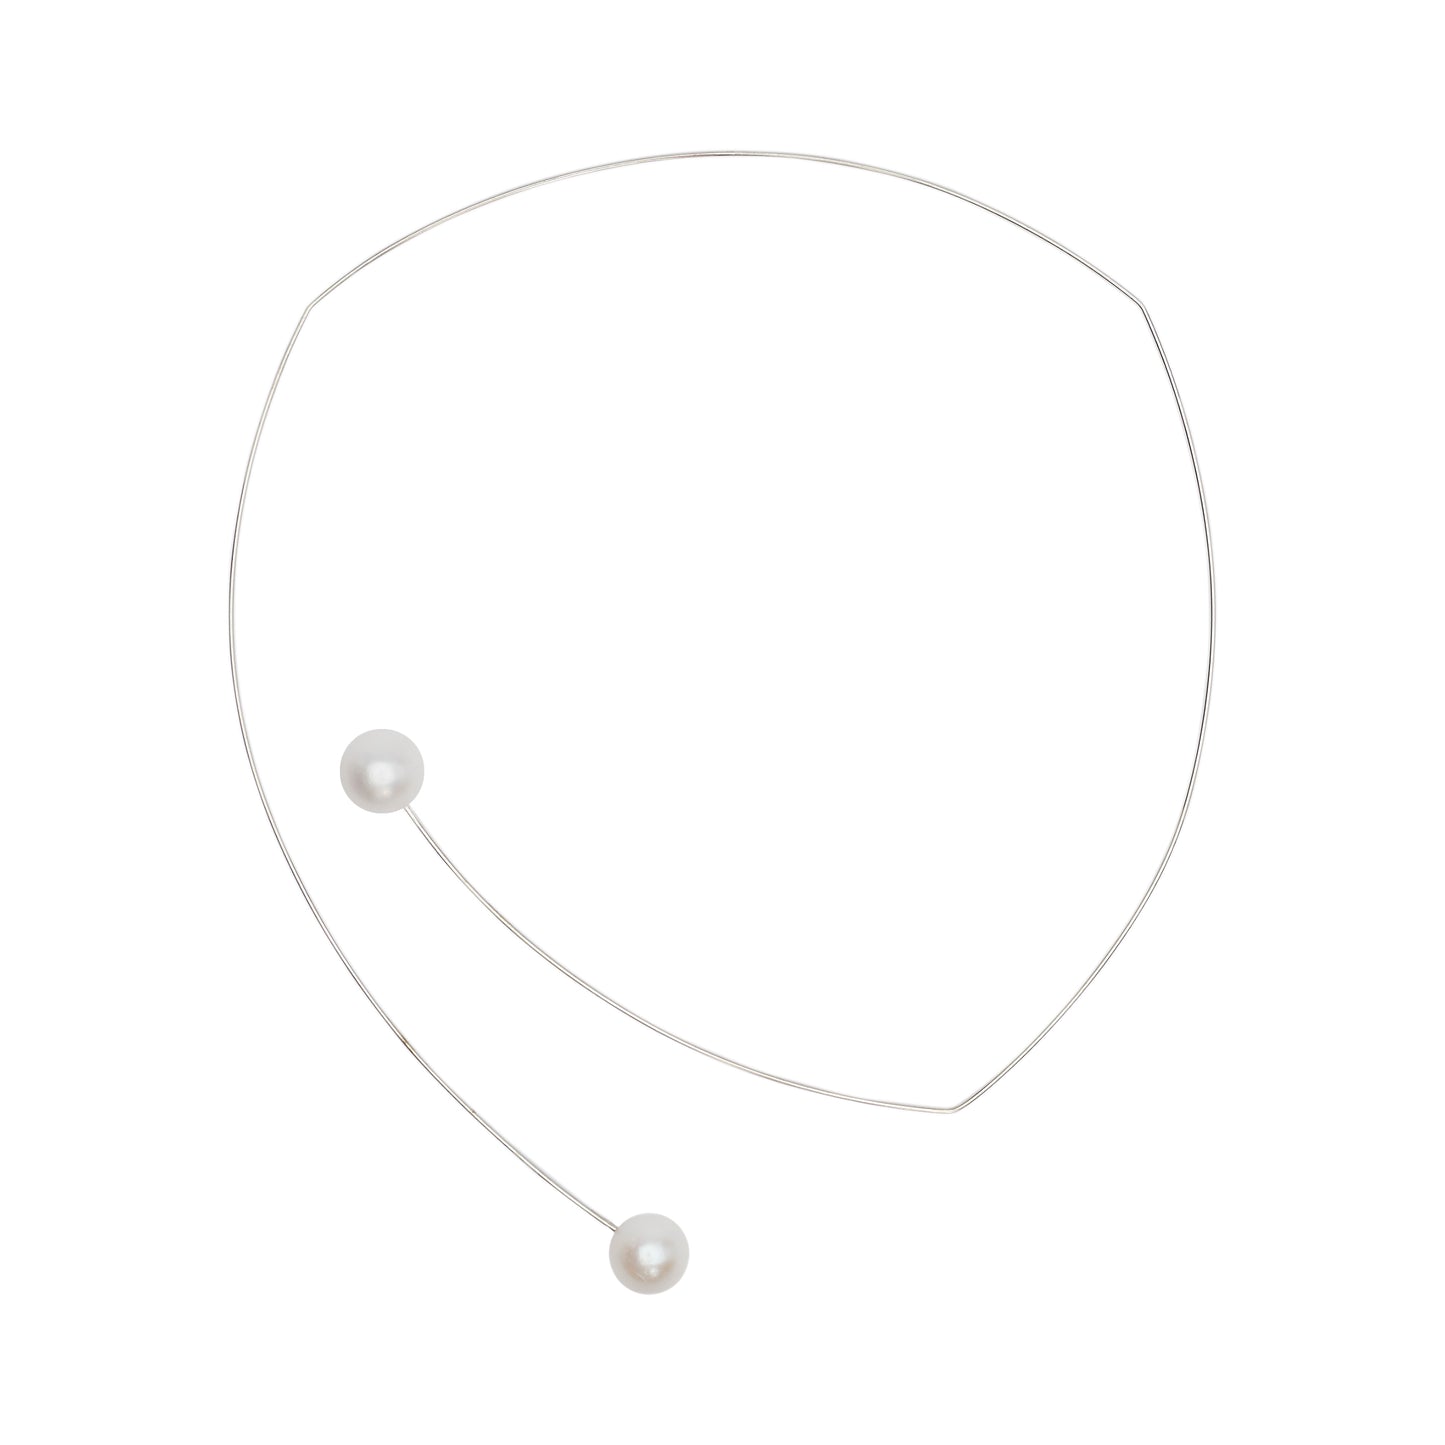 Square Asymmetric Neck Wire with White Pearls (12mm)